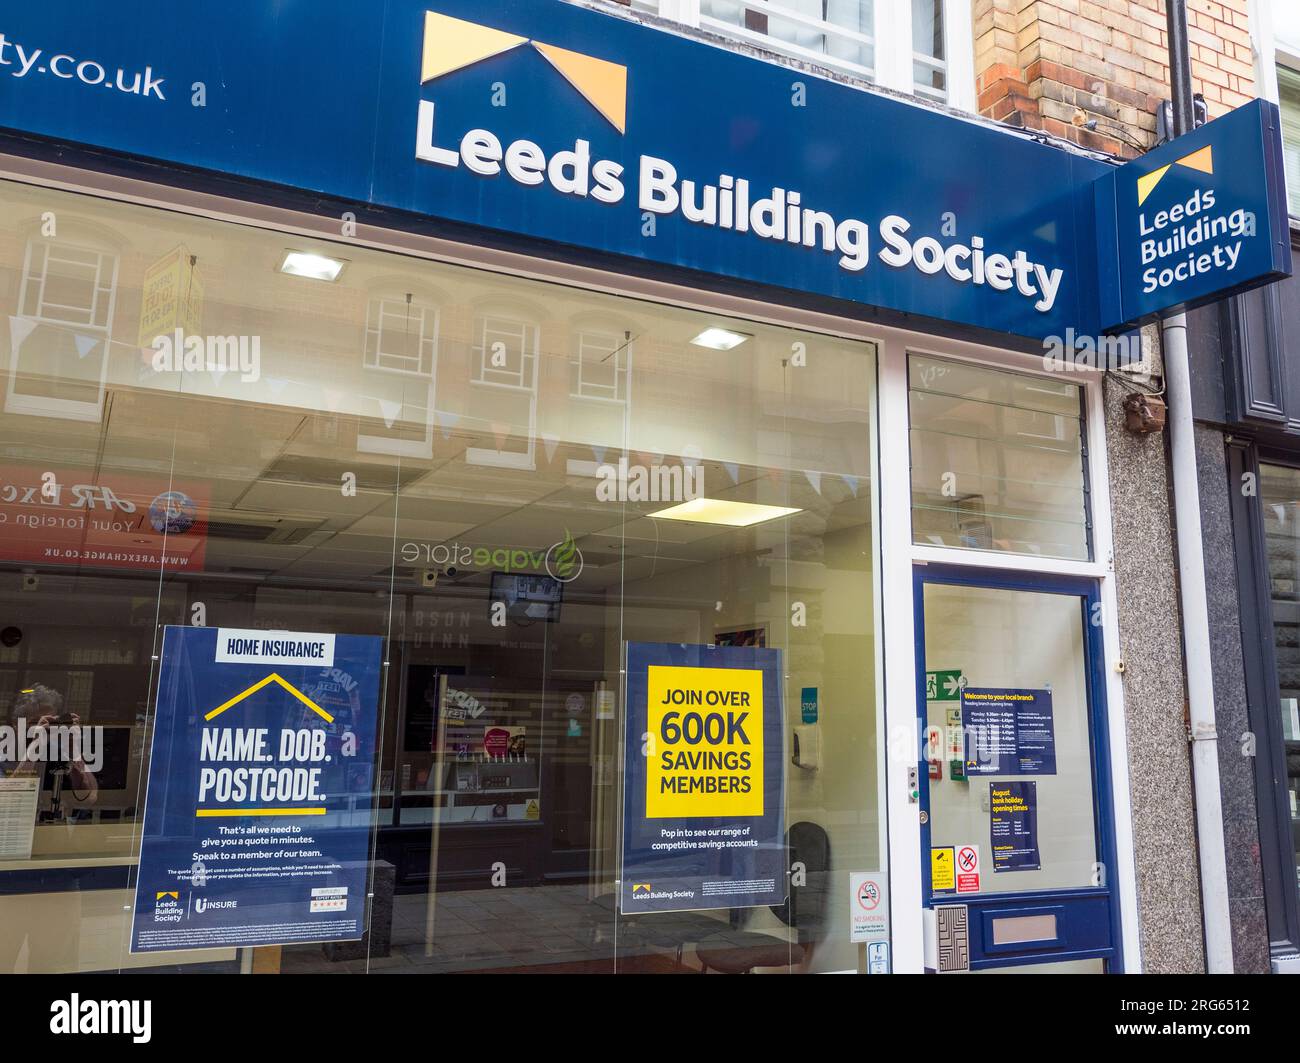 Leeds Building Society, Reading, Berkshire, Angleterre, Royaume-Uni, GO. Banque D'Images